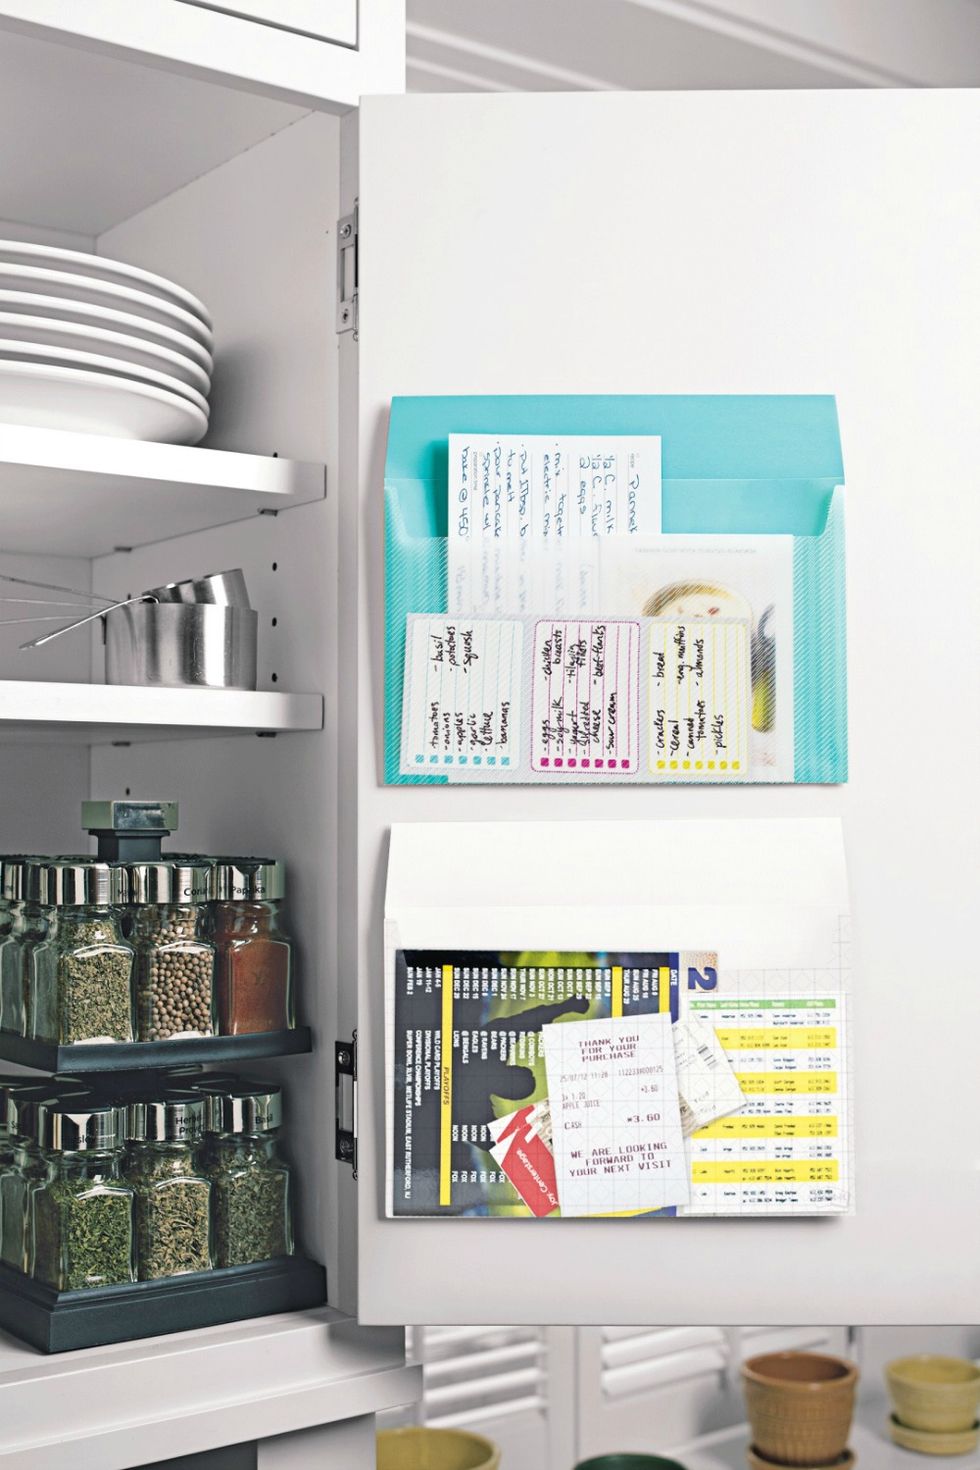 Home Organization: 27 Organizing Ideas for Your Home